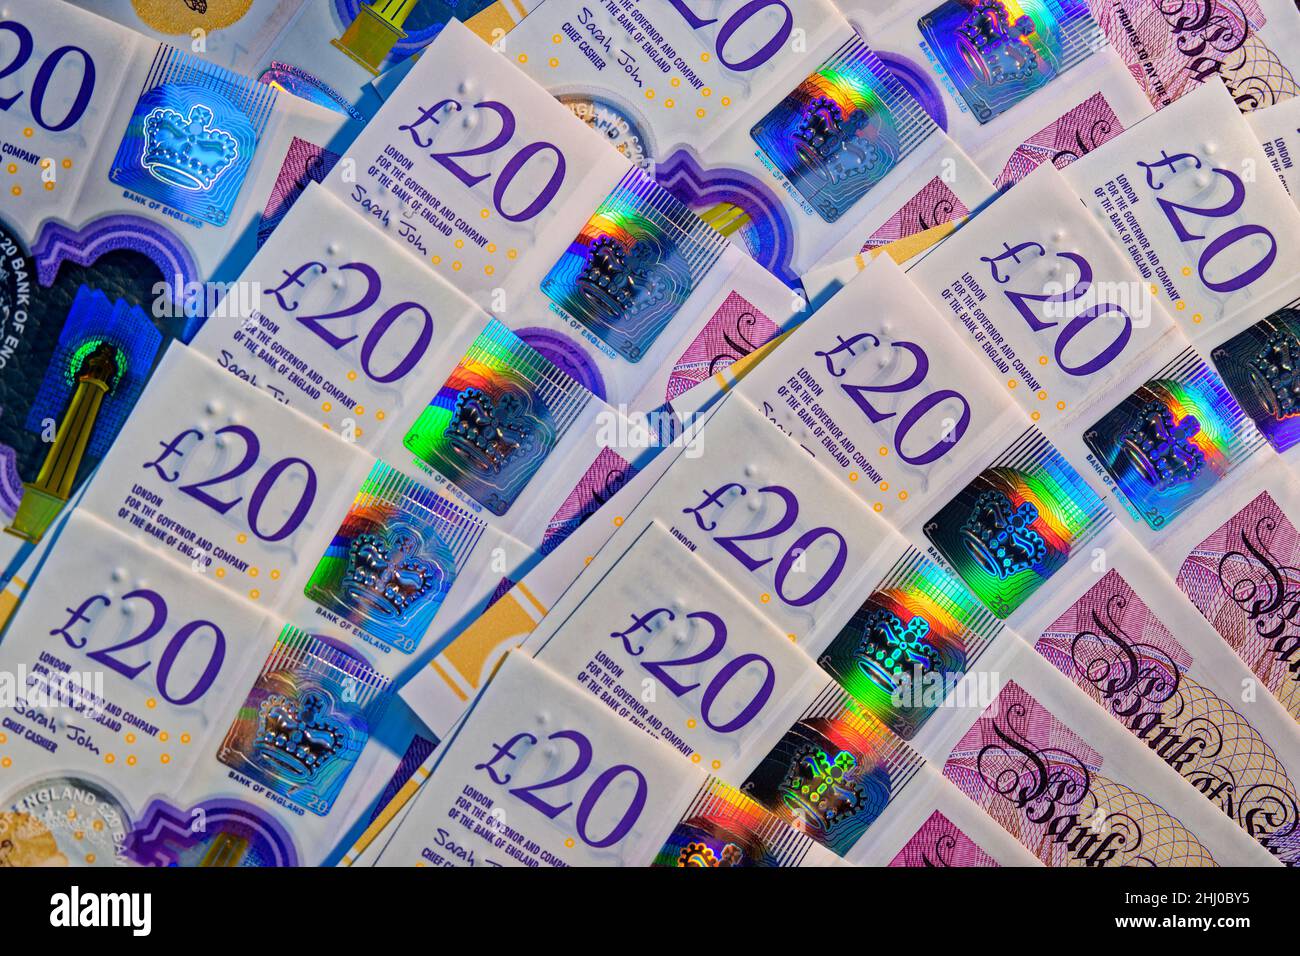 Twenty Pounds Sterling notes showing security hologram printing features. Stock Photo